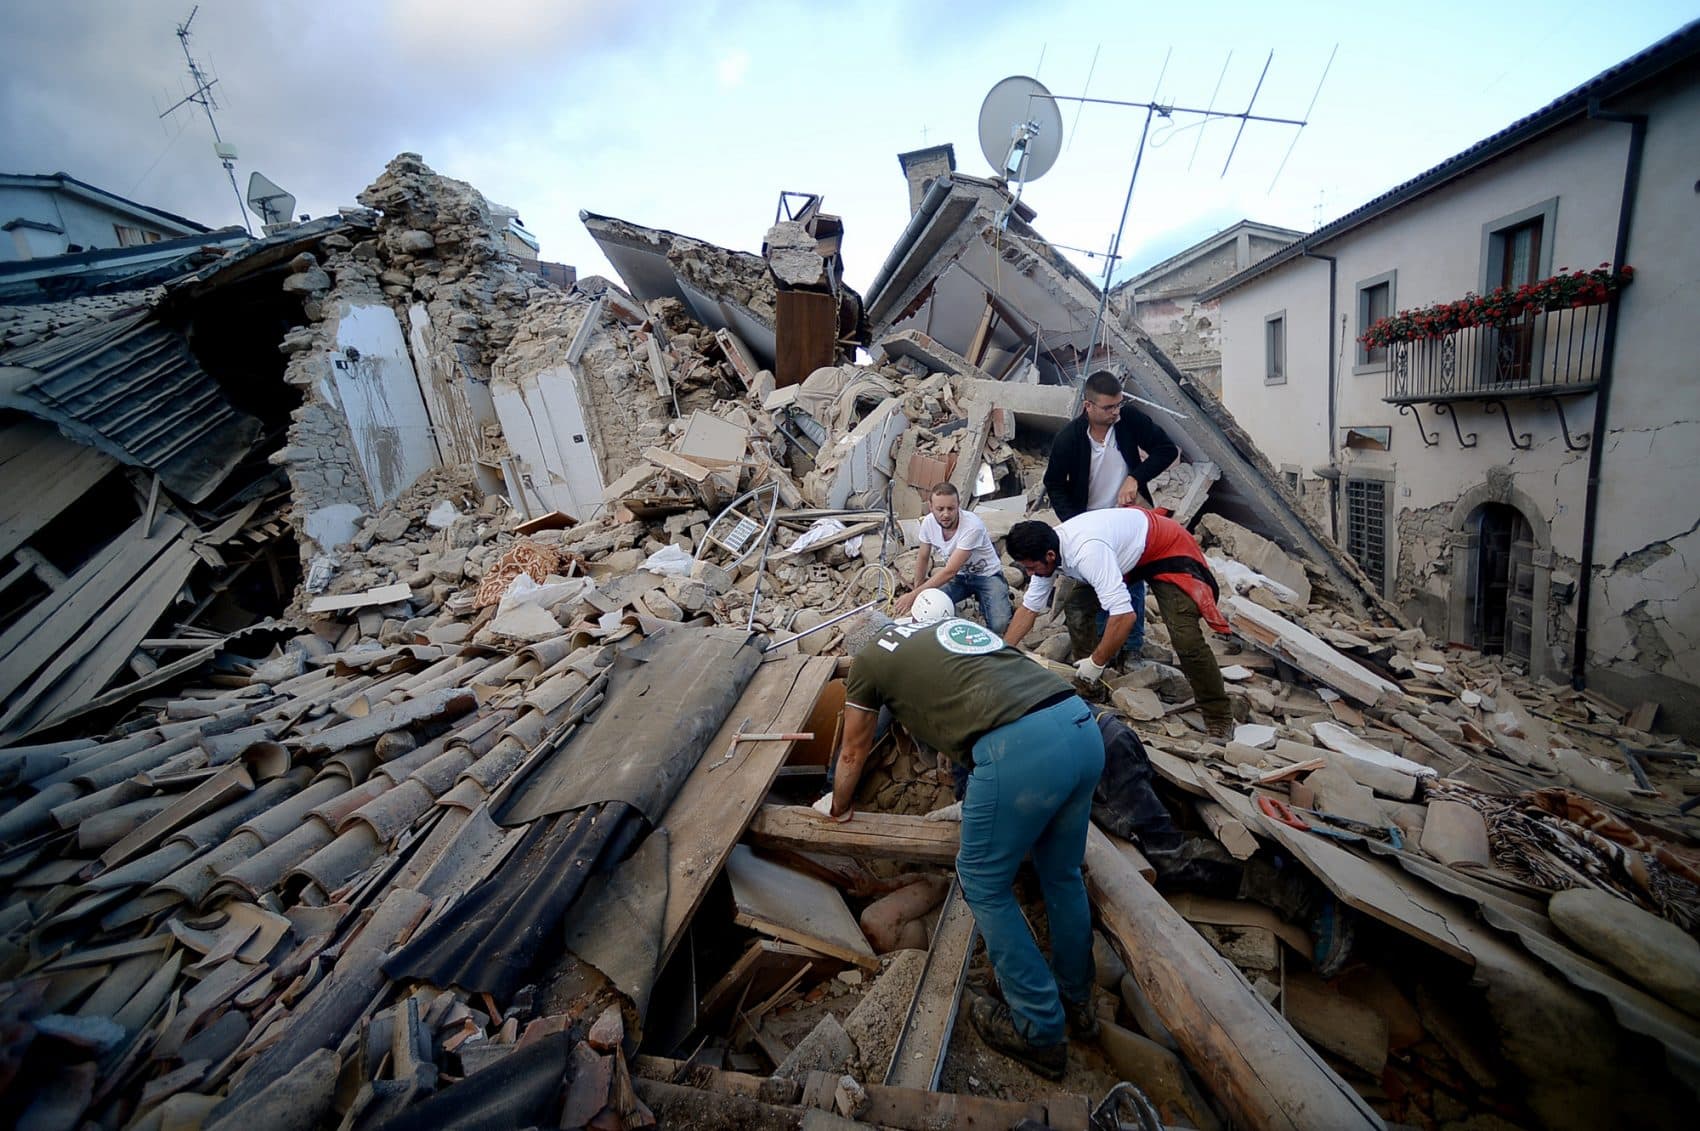 A resident searches for victims in the rubble after a strong earthquake hit Amatrice on Aug. 24, 2016. (Flippo Monteforte/AFP/Getty Images)